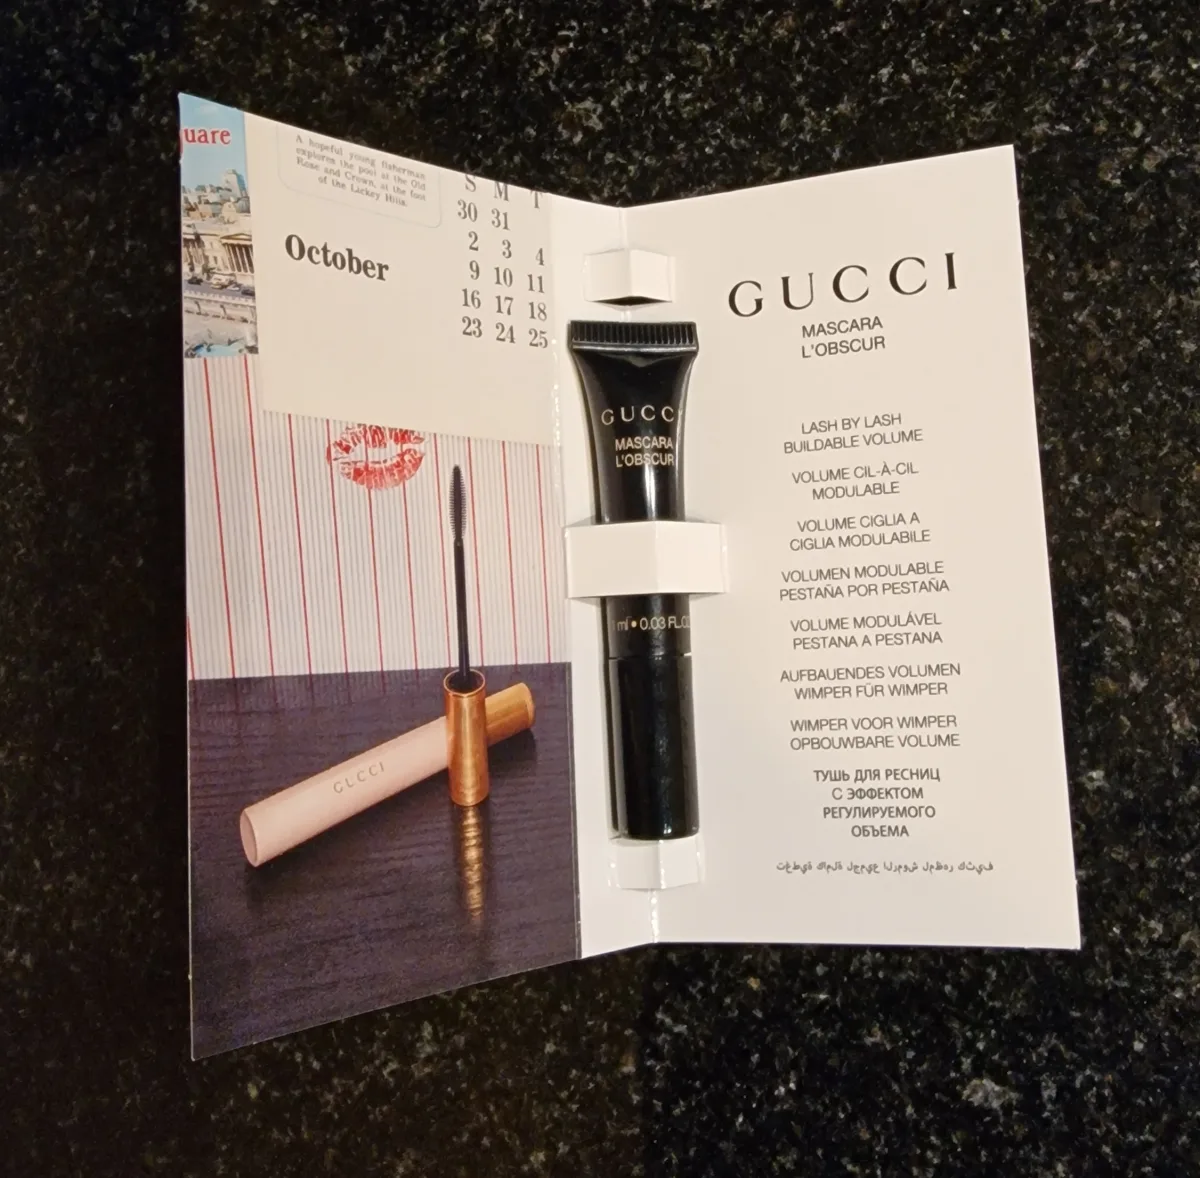 Gucci Gucci Beauty Mascara L'Obscur - before review image